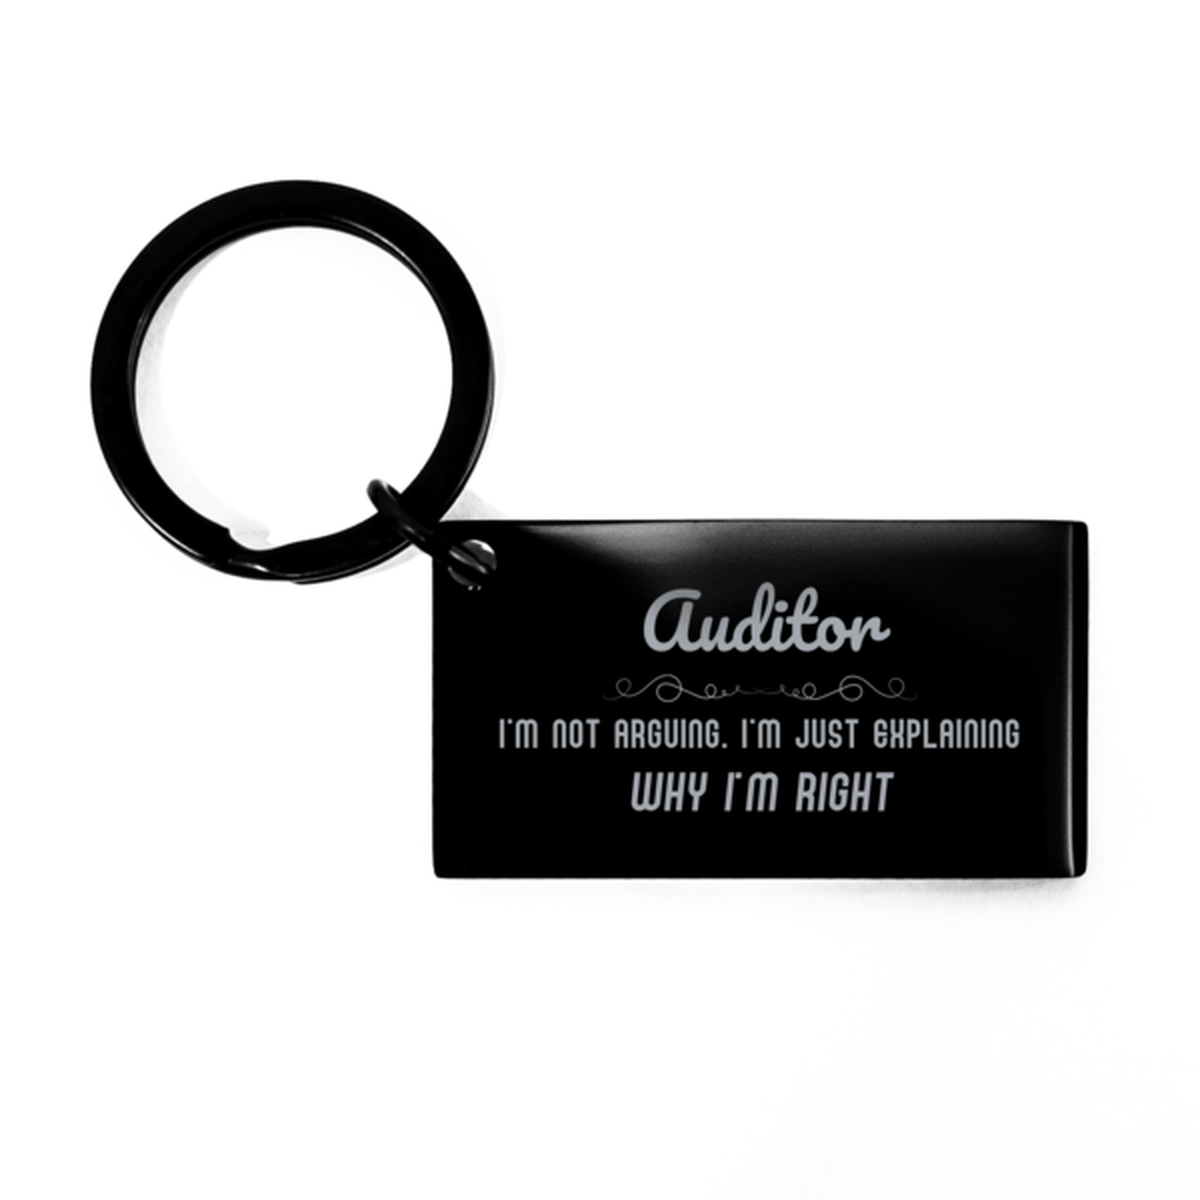 Auditor I'm not Arguing. I'm Just Explaining Why I'm RIGHT Keychain, Funny Saying Quote Auditor Gifts For Auditor Graduation Birthday Christmas Gifts for Men Women Coworker